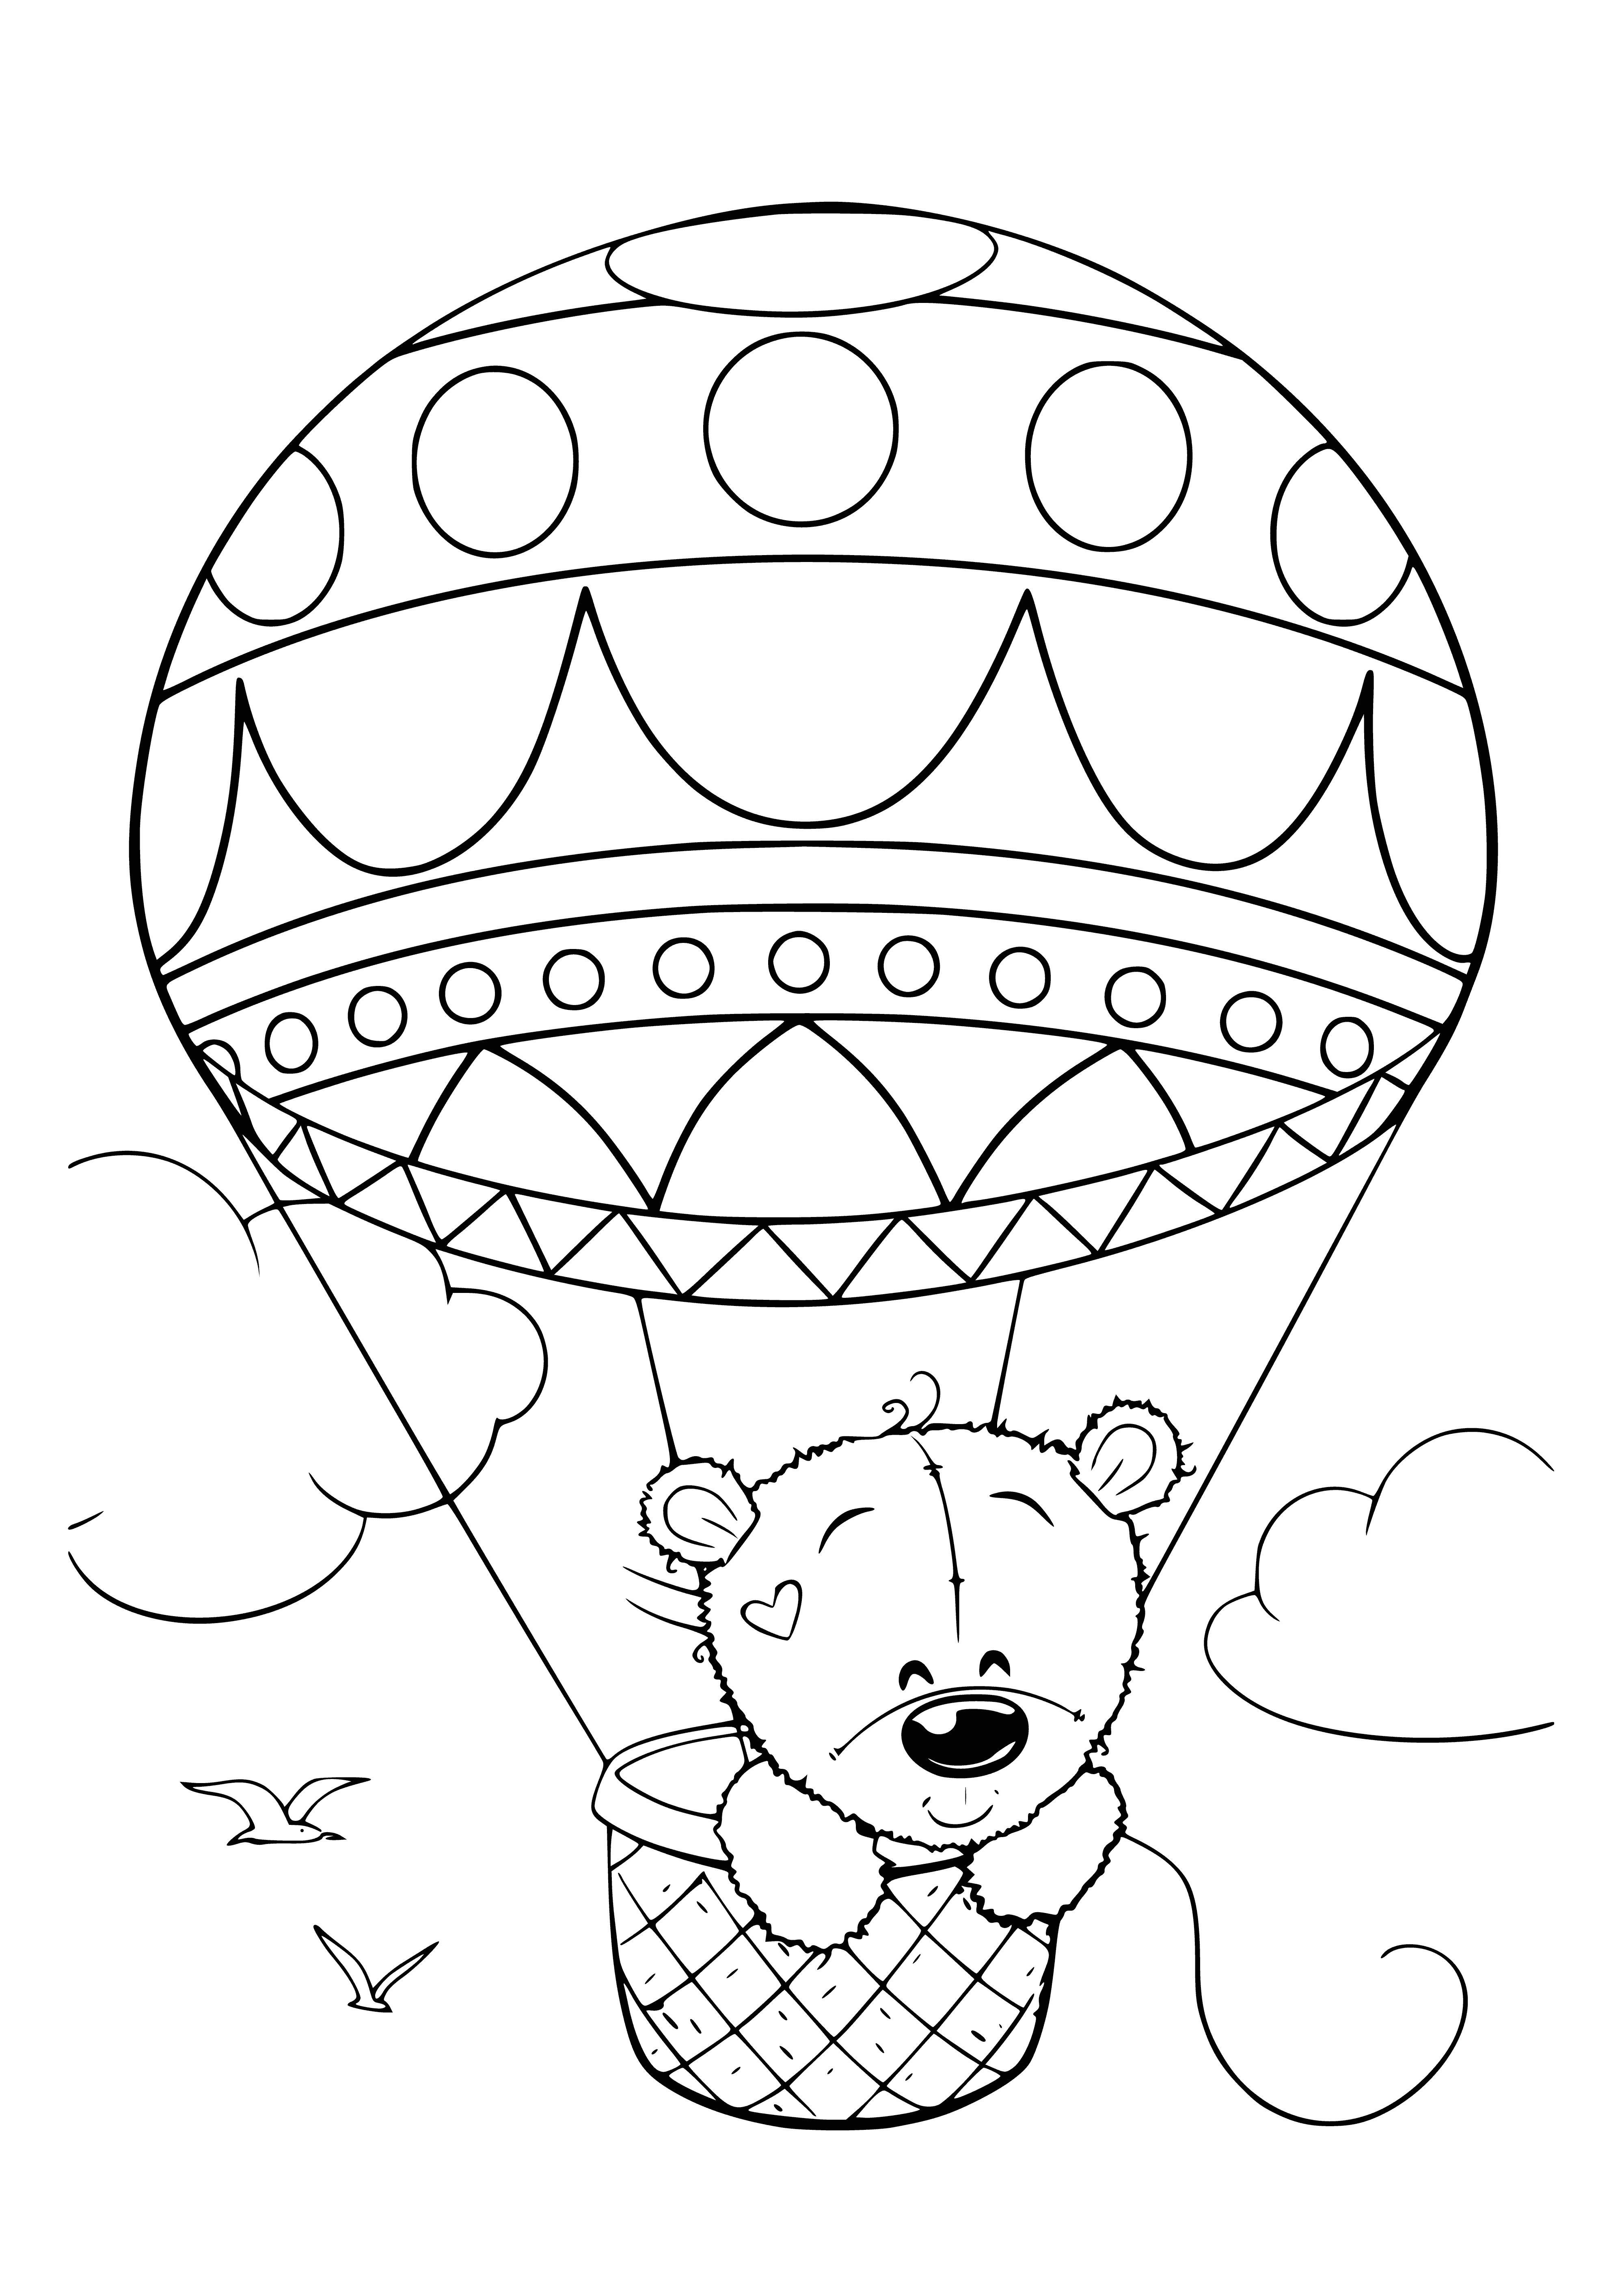 coloring page: Adorable coloring page of balloon bear on hill with smiley face & blue sky with white clouds - sure to make any smile! #coloringsheet